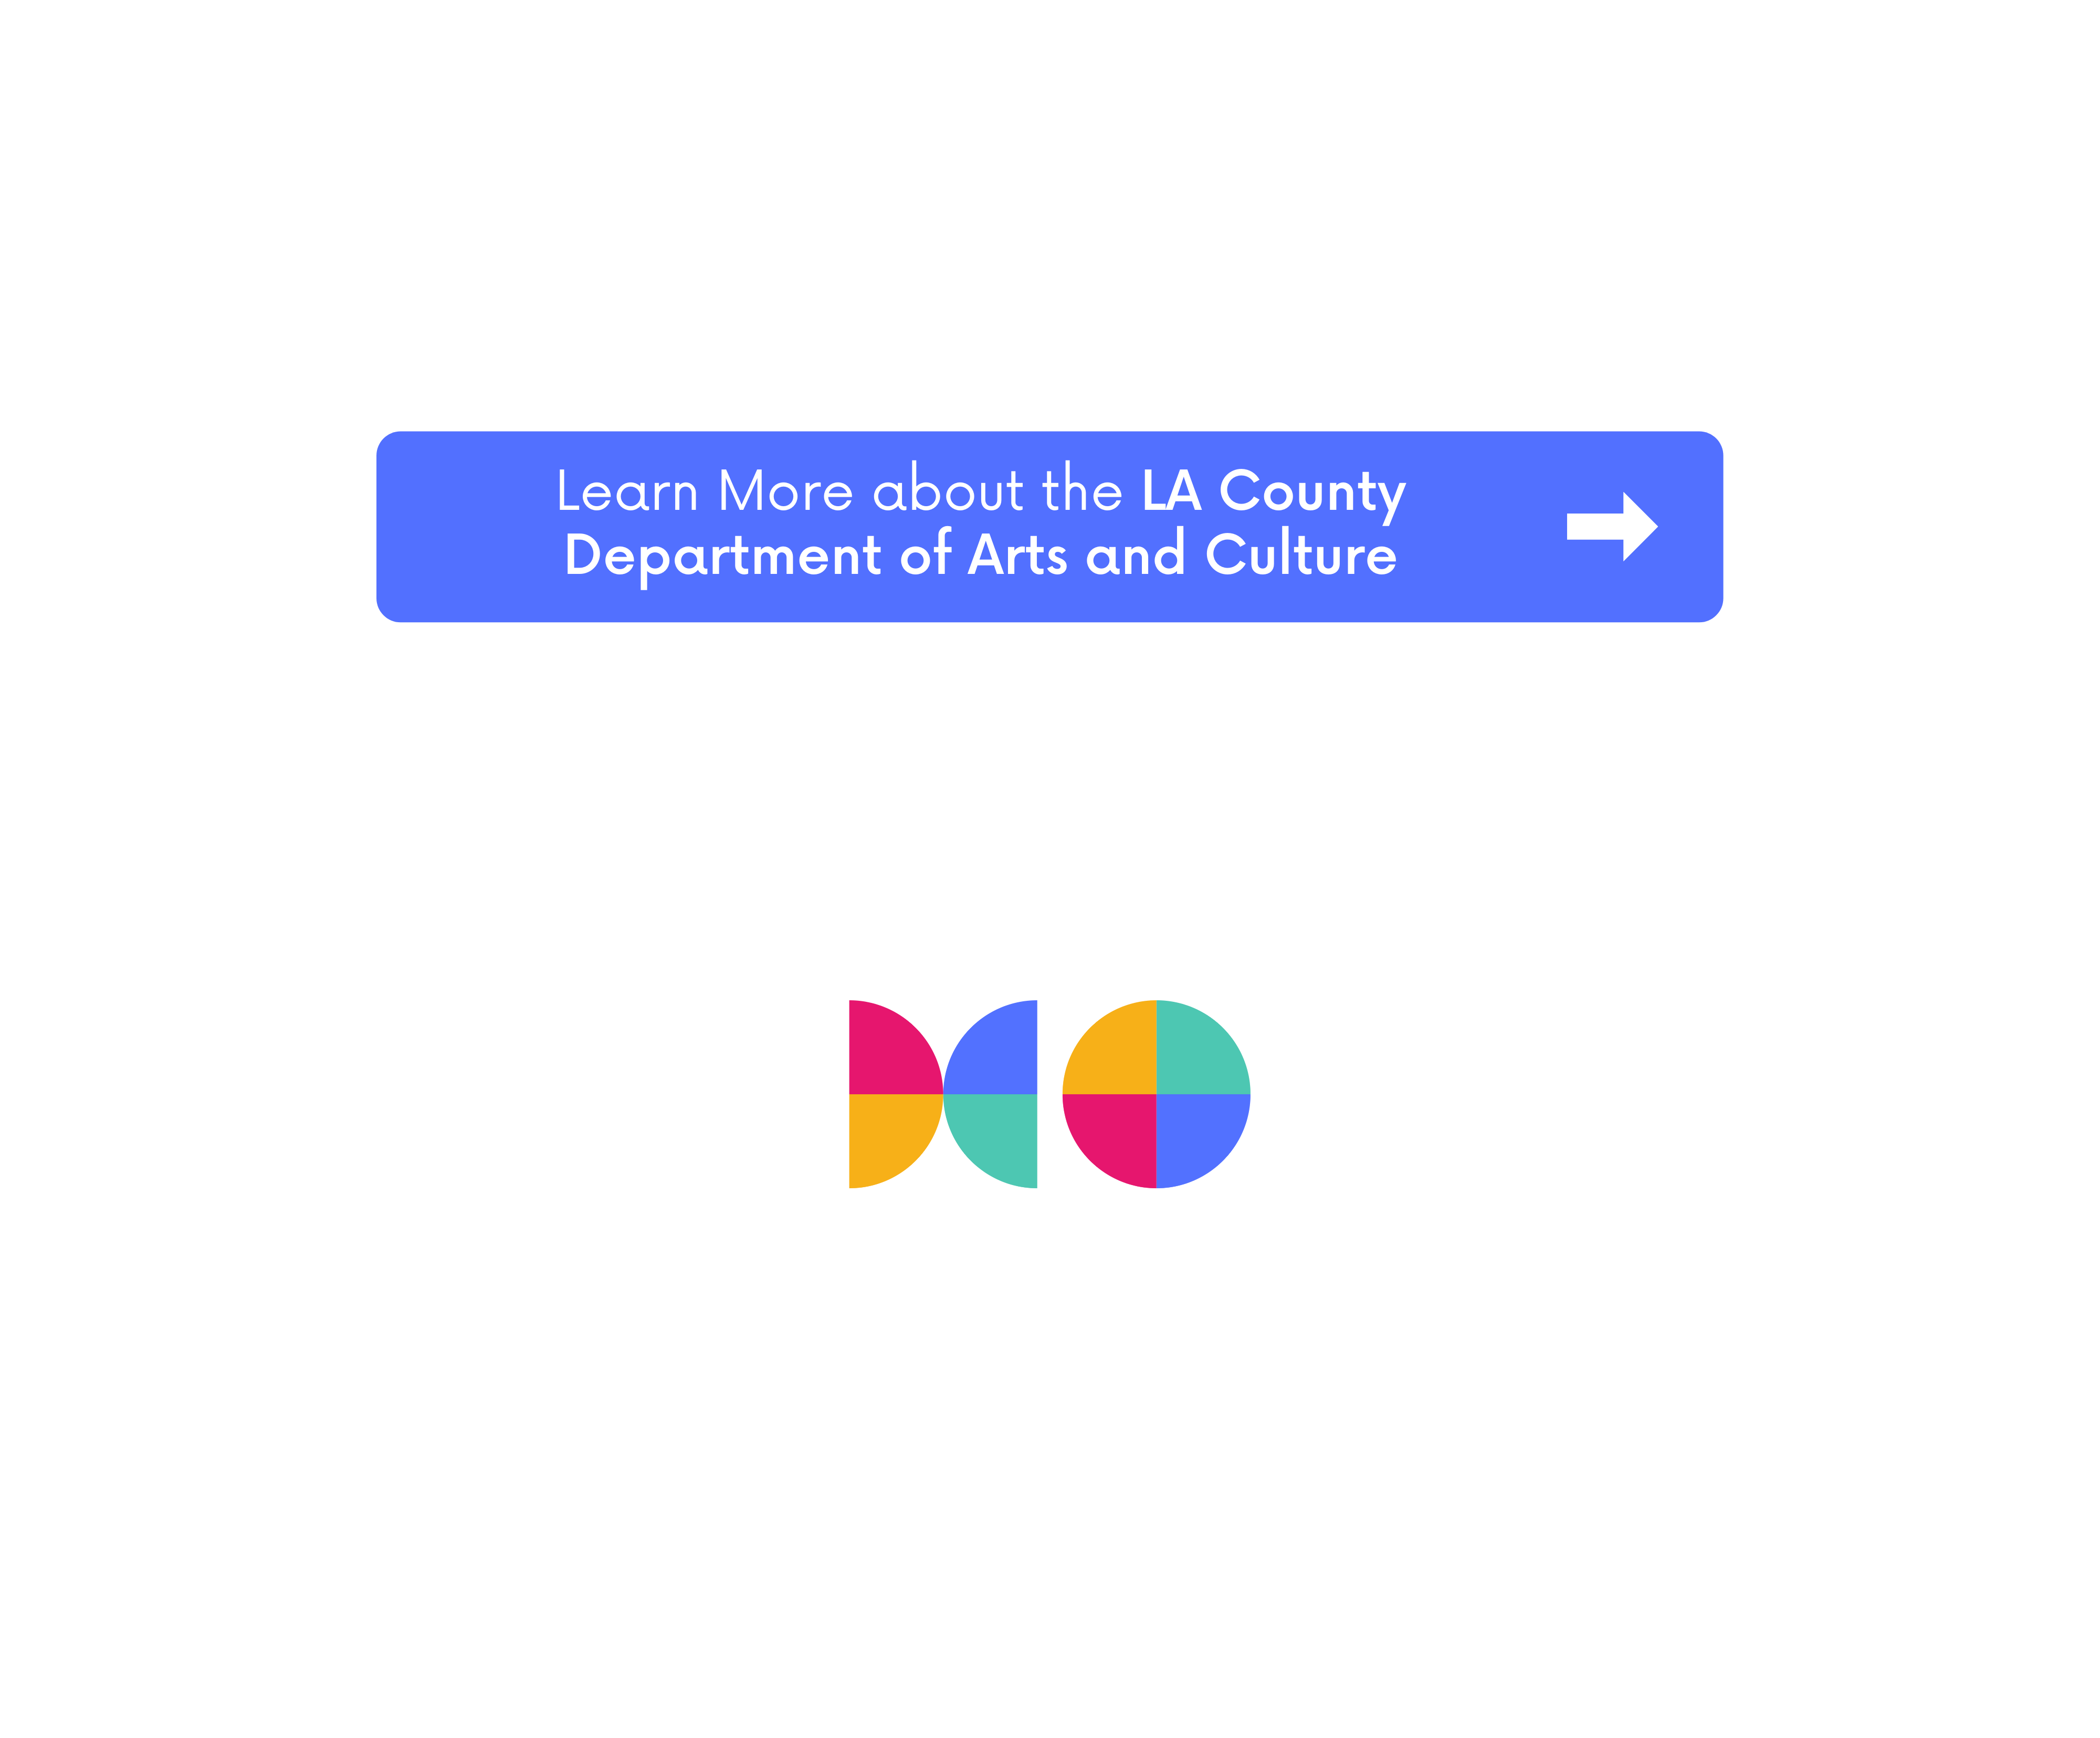 Learn More about LA County Department of Arts and Culture